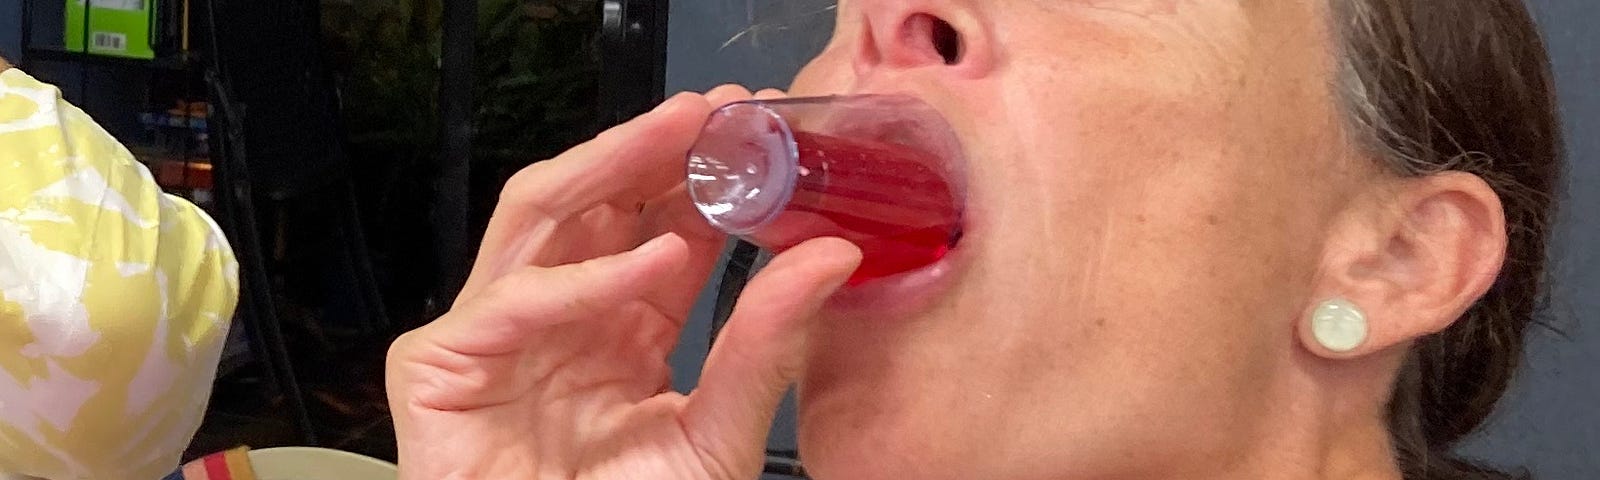 Adult woman drinking a red Jell-O shot